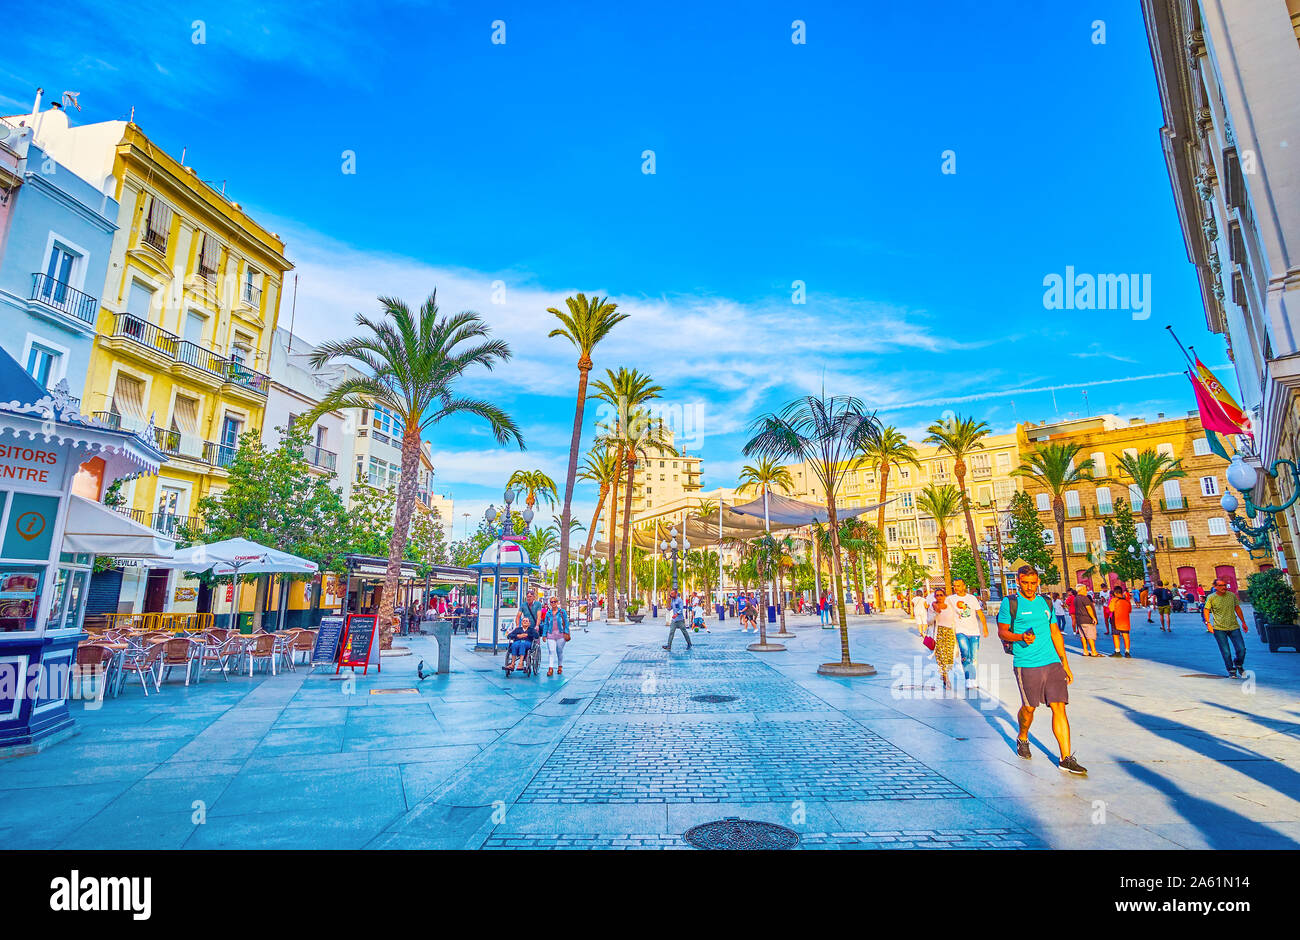 CADIZ, - SEPTEMBER 19, 2019: The Plaza de San Juan de Dios is one of the largest squares in old town with numerous restaurants, shops, and other Stock Photo Alamy